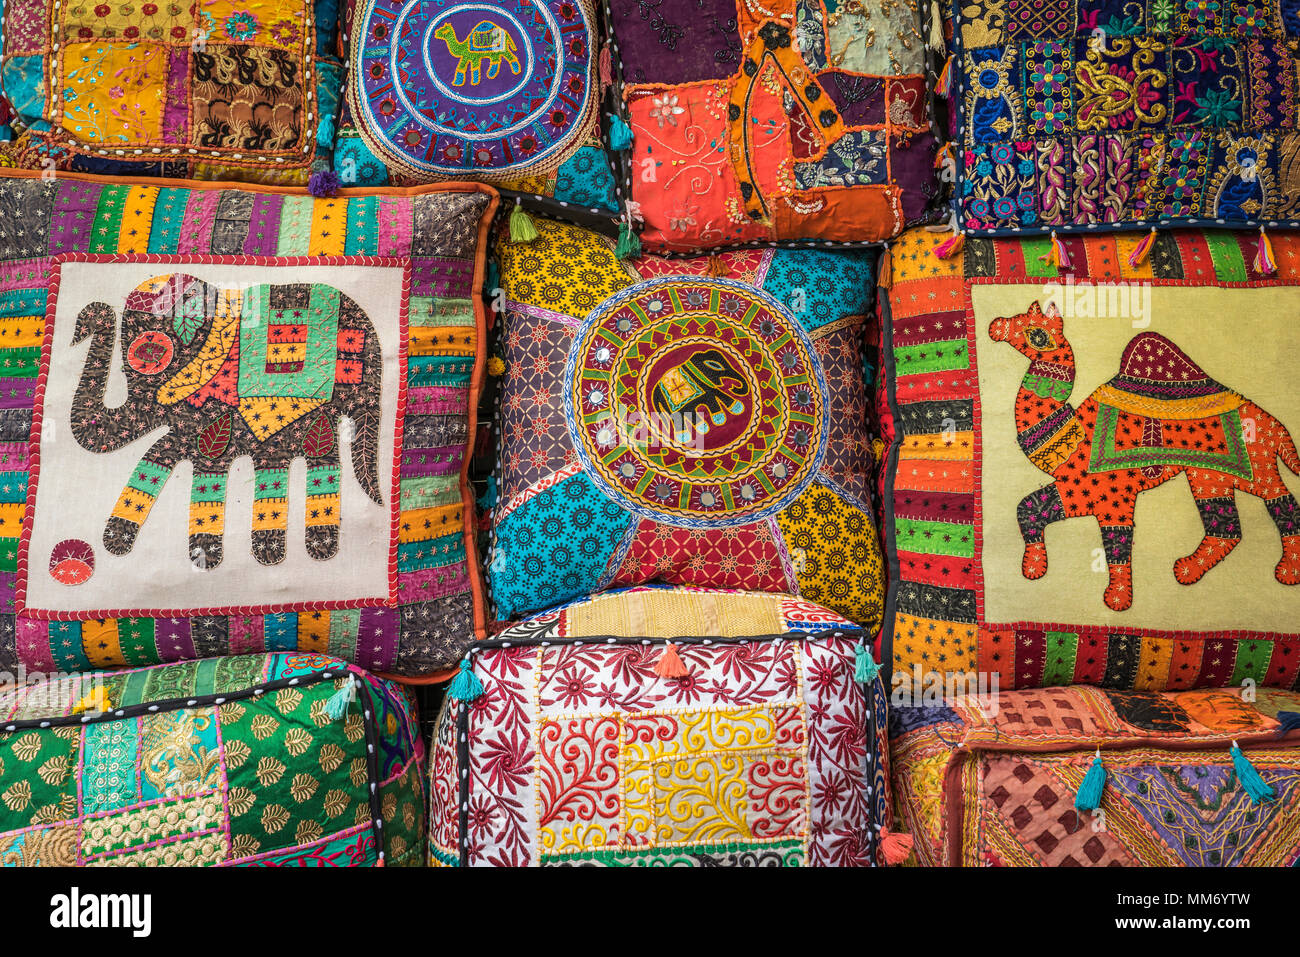 Clothes and textiles for sale in the textile markets of old town Dubai UAE, Middle  East Stock Photo - Alamy